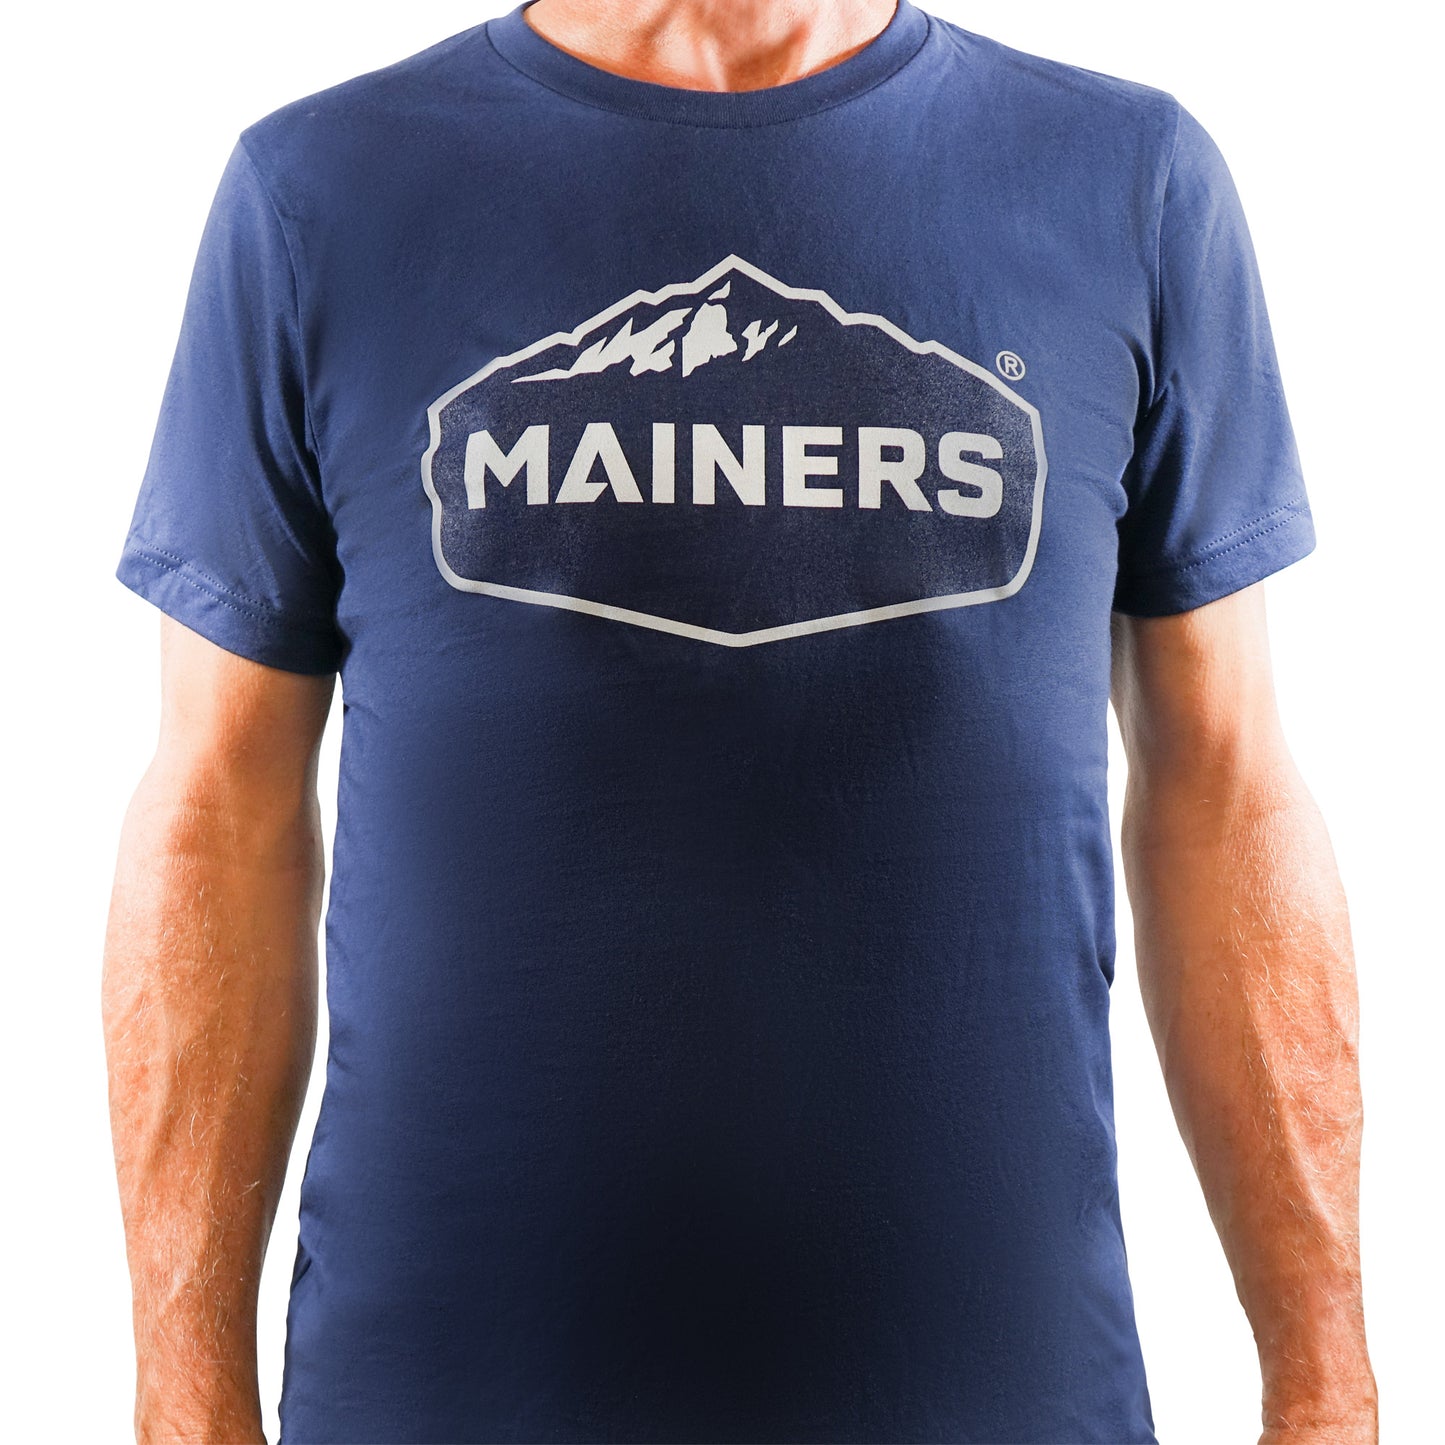 Mainers Mainers Cotton Tee - navy.